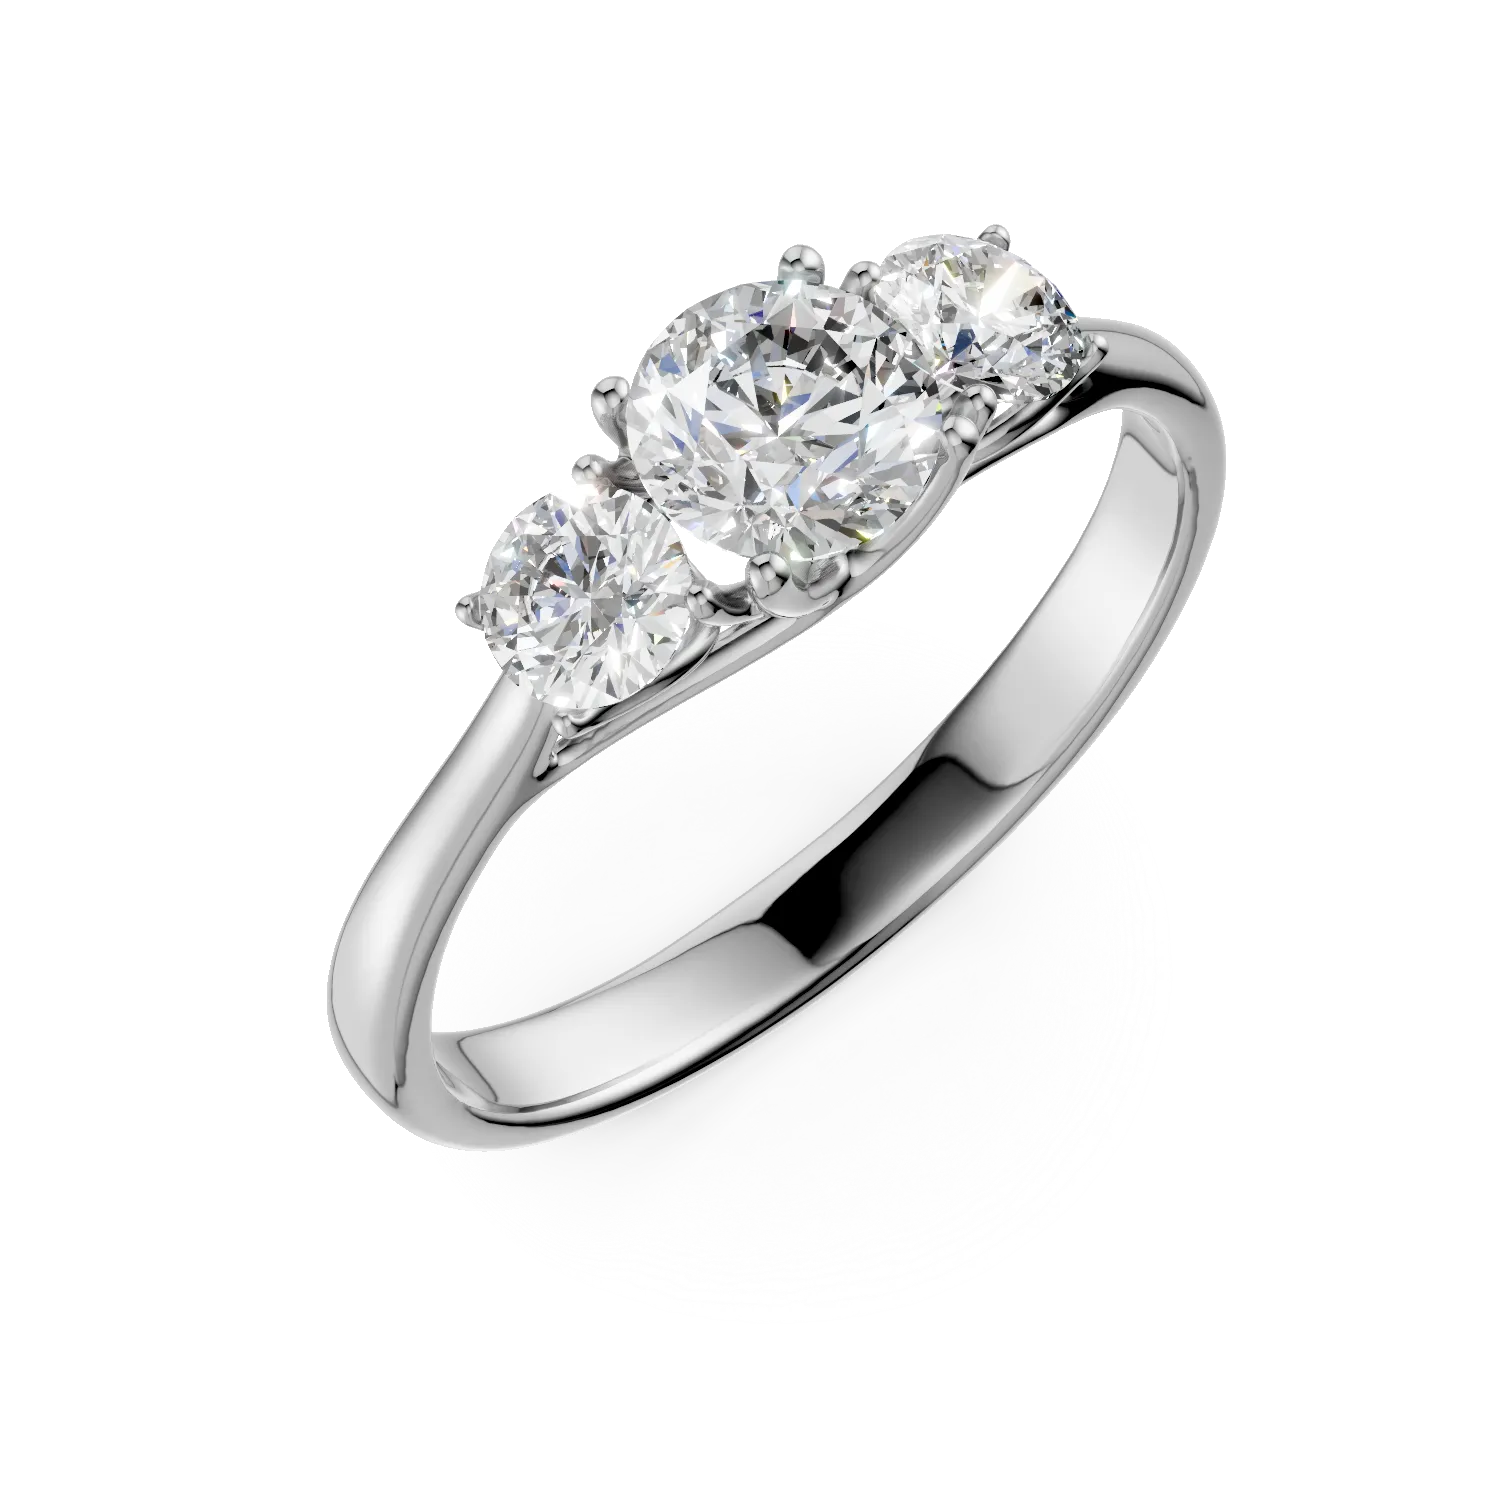 White gold Cathy ring with 2.1ct lab grown diamonds